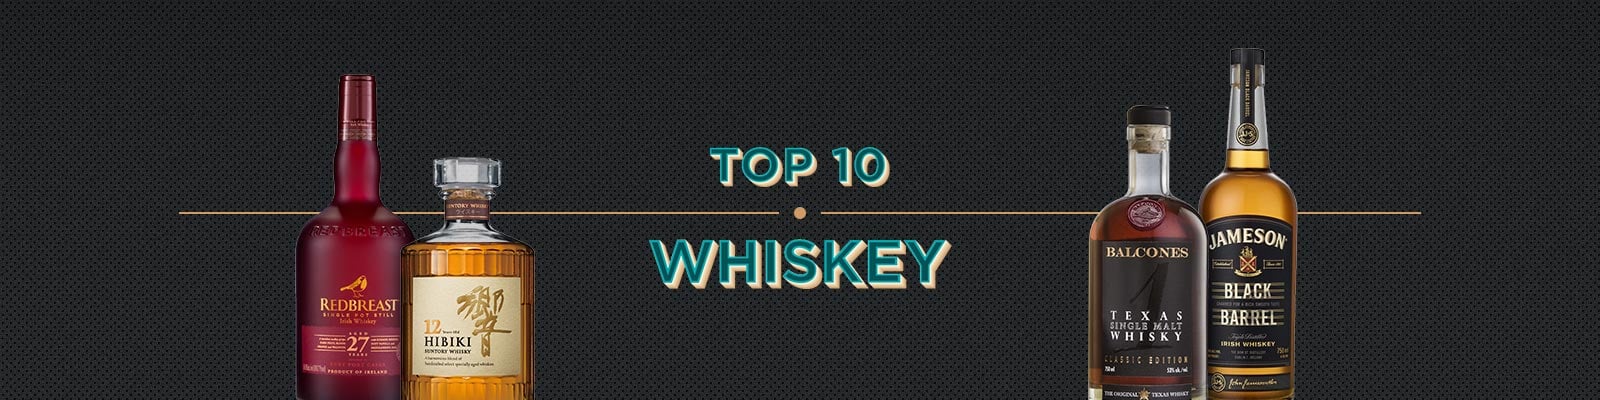 Top 10 Whiskey